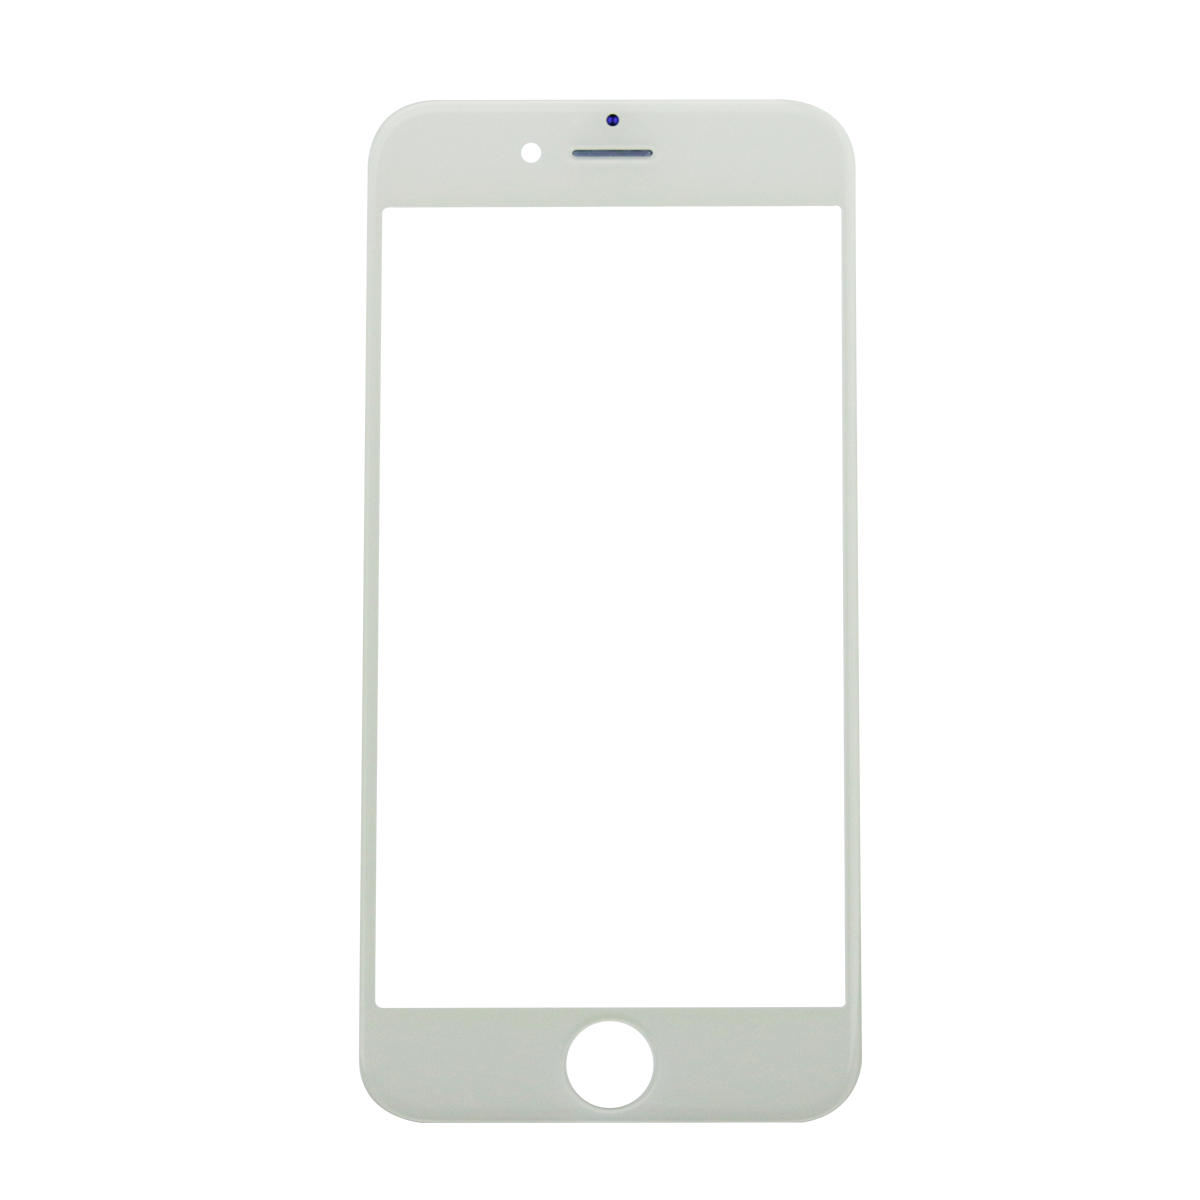 Iphone Png Background